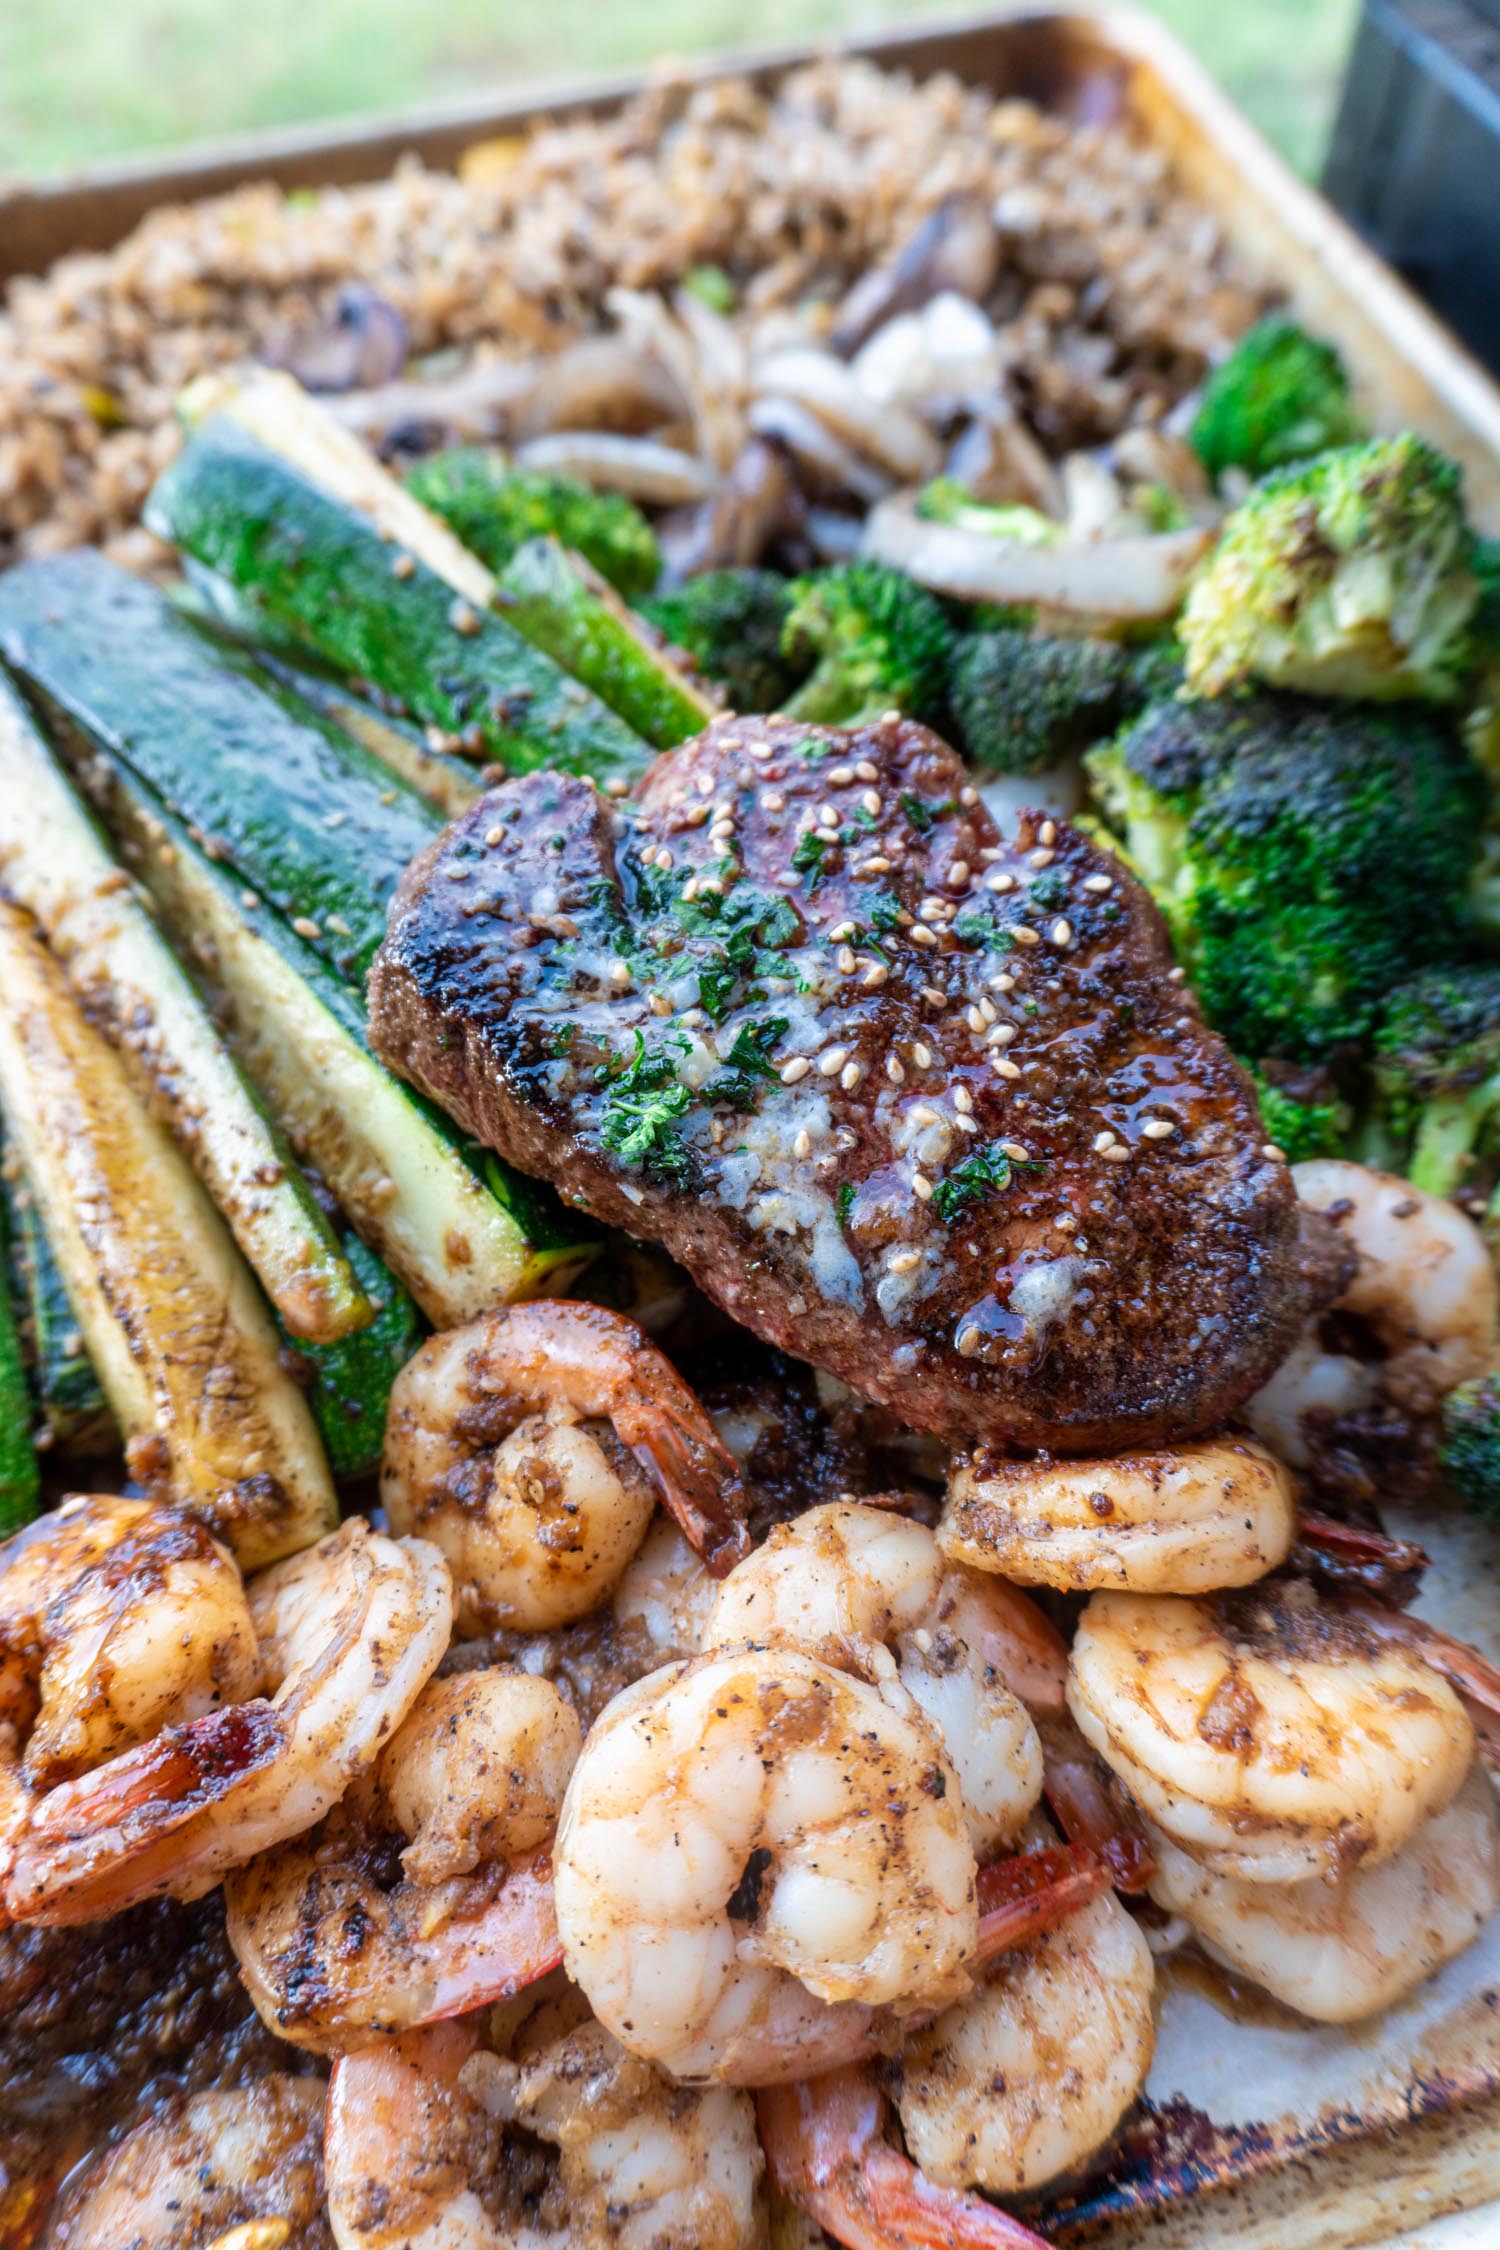 A cookie sheet loaded with hibachi favorites like fried rice, vegetables, and hibachi steak.